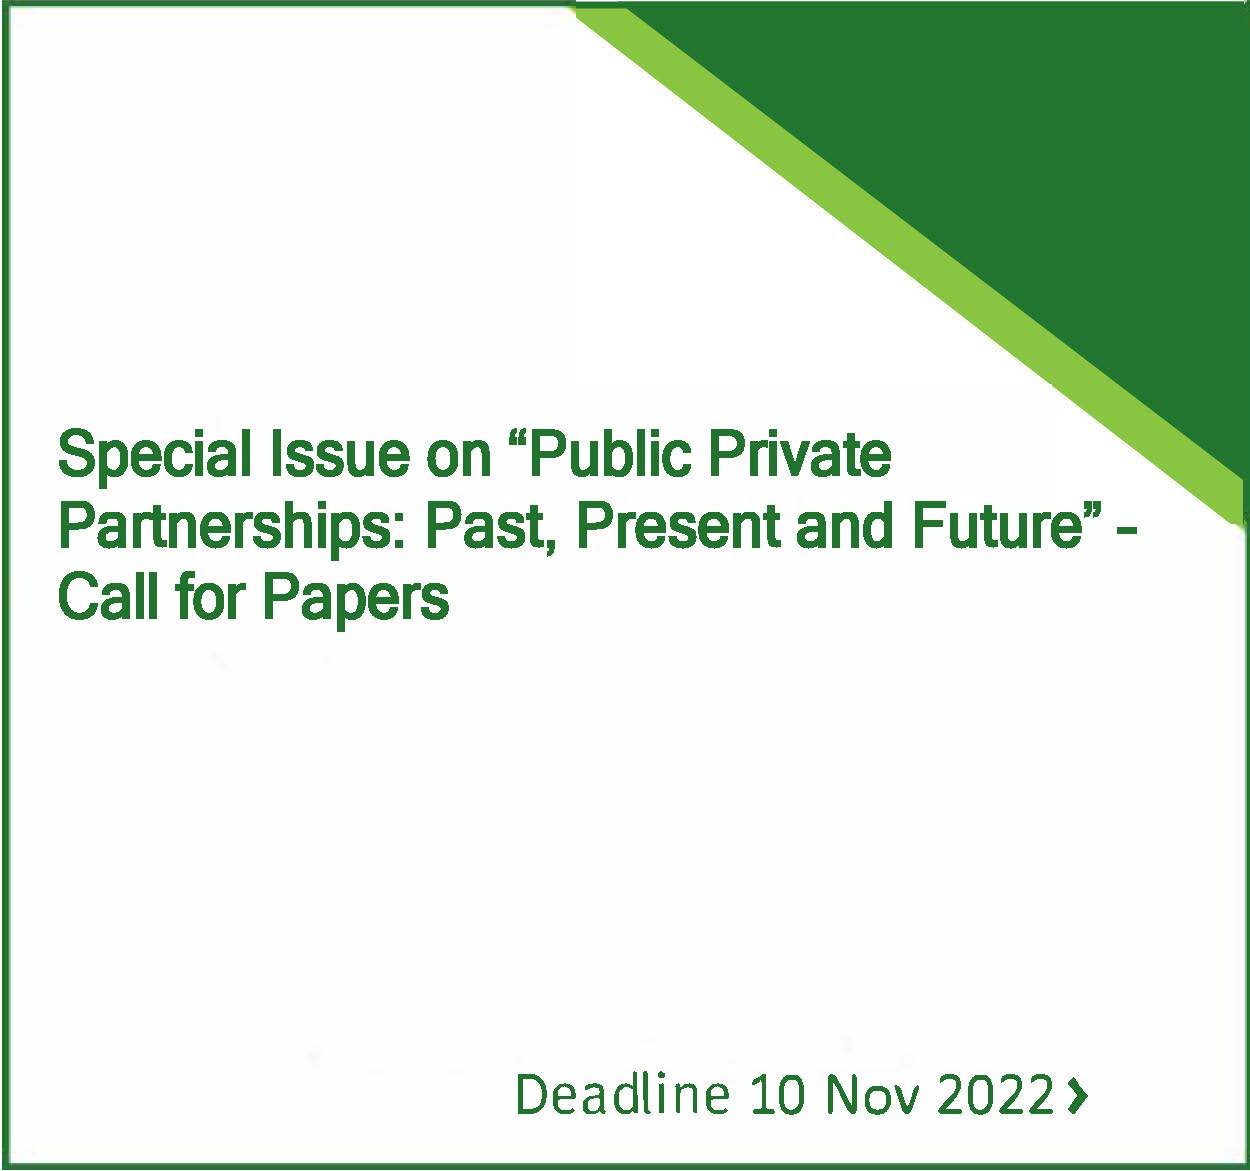 Special Issue on “Public Private Partnerships: Past, Present and Future” – Call for Papers